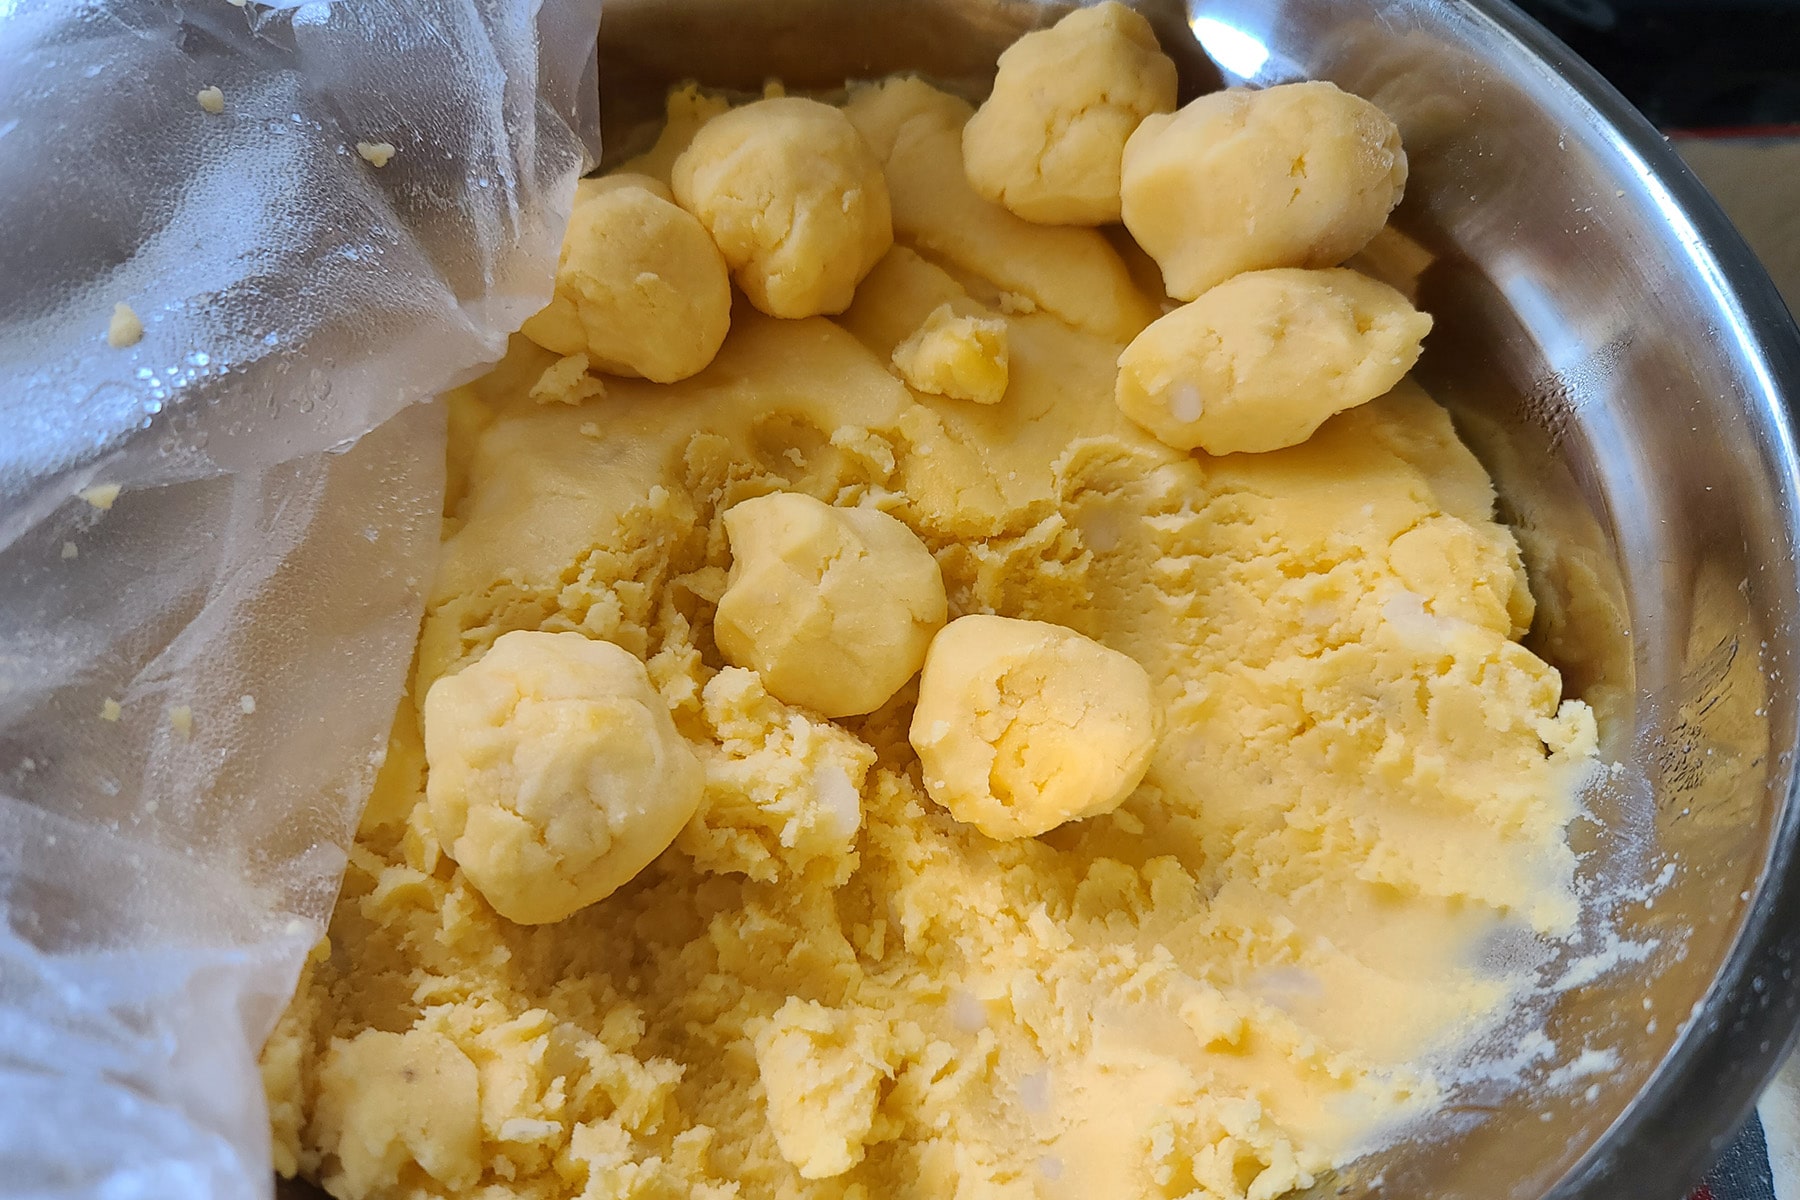 A bowl of cheesy potato filling, with several balls of it on the surface.